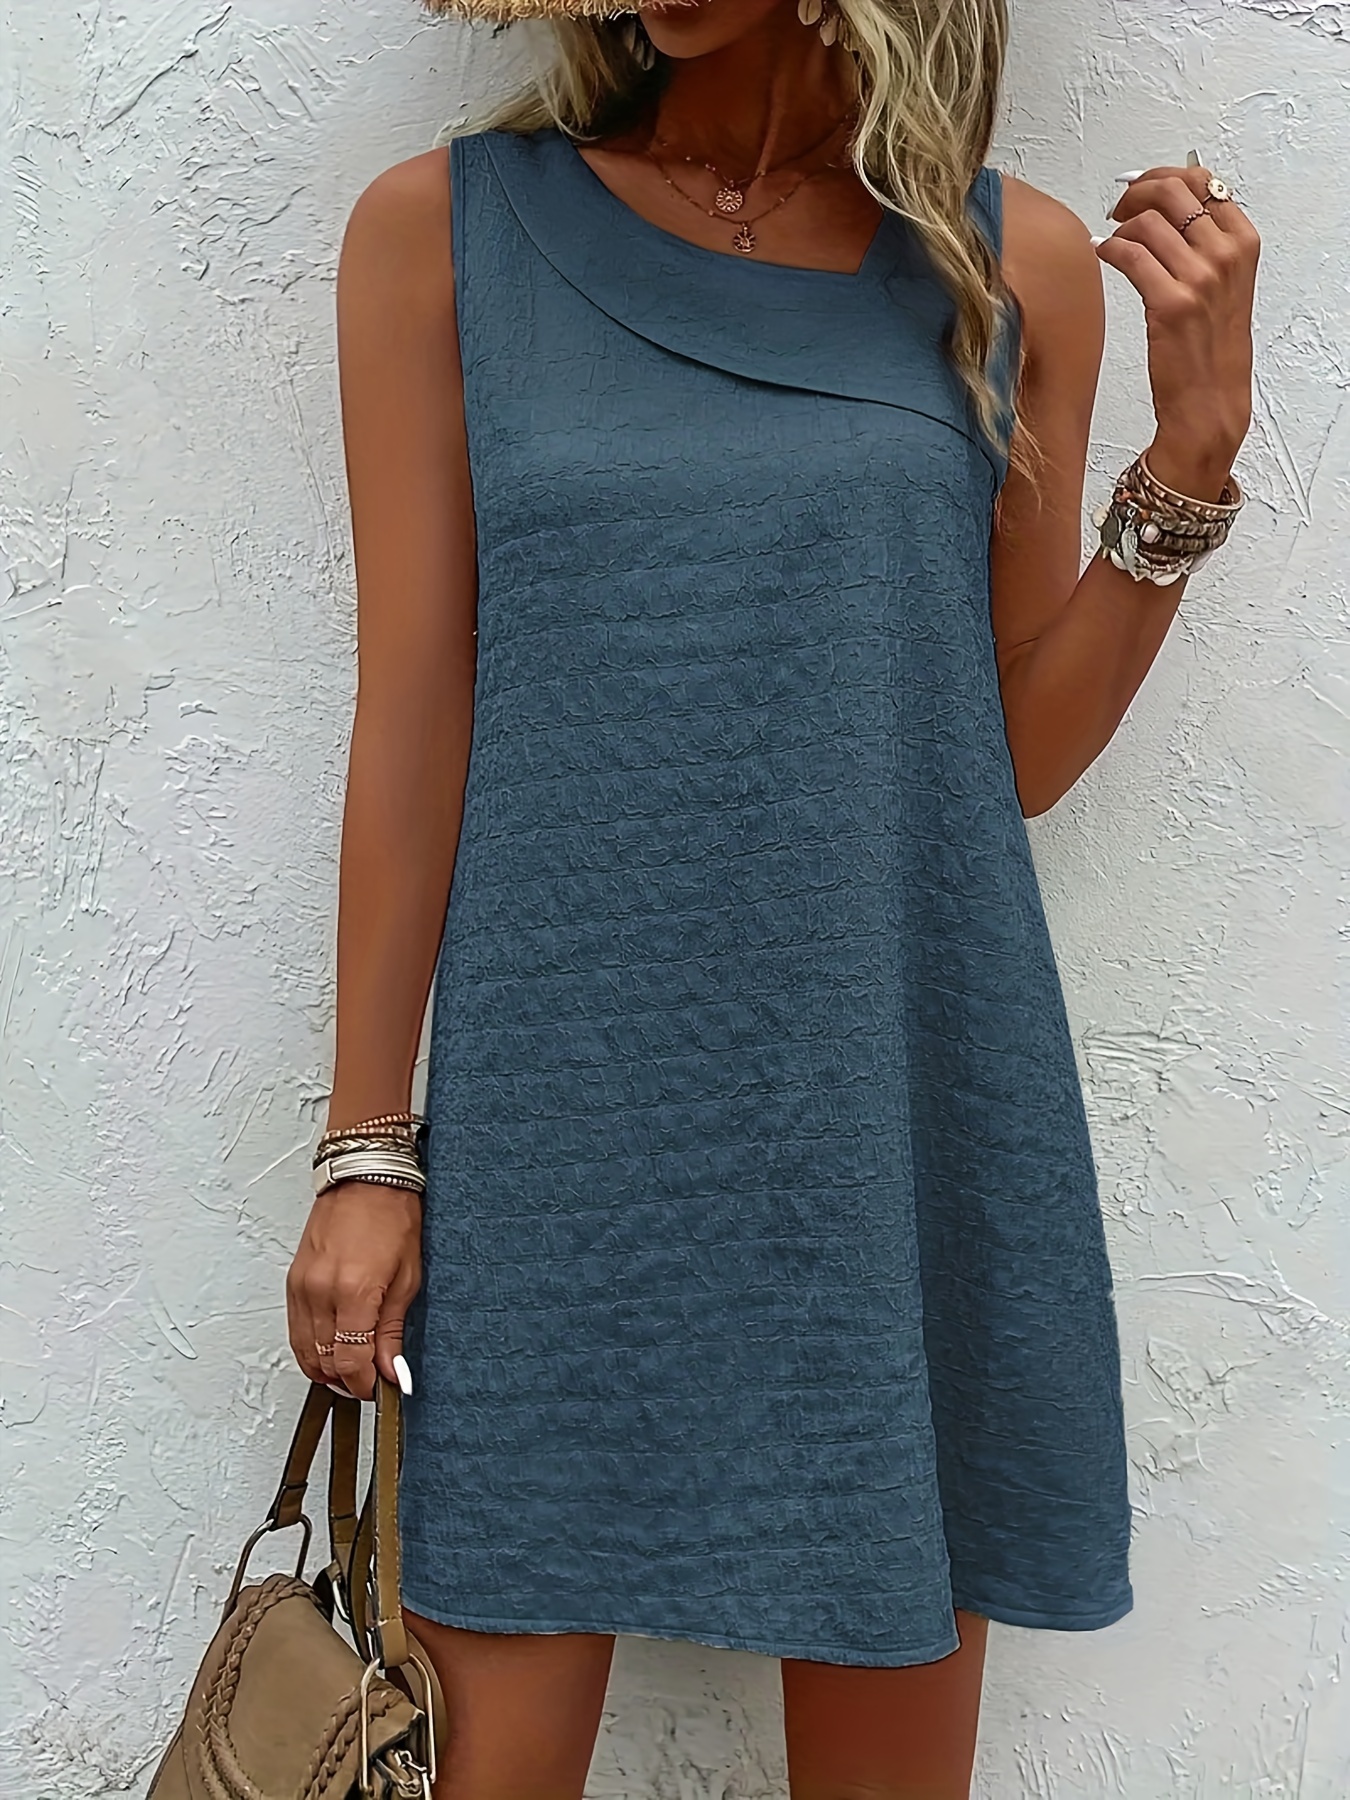 loose mini tank dress sleeveless casual dress for summer spring womens clothing details 121